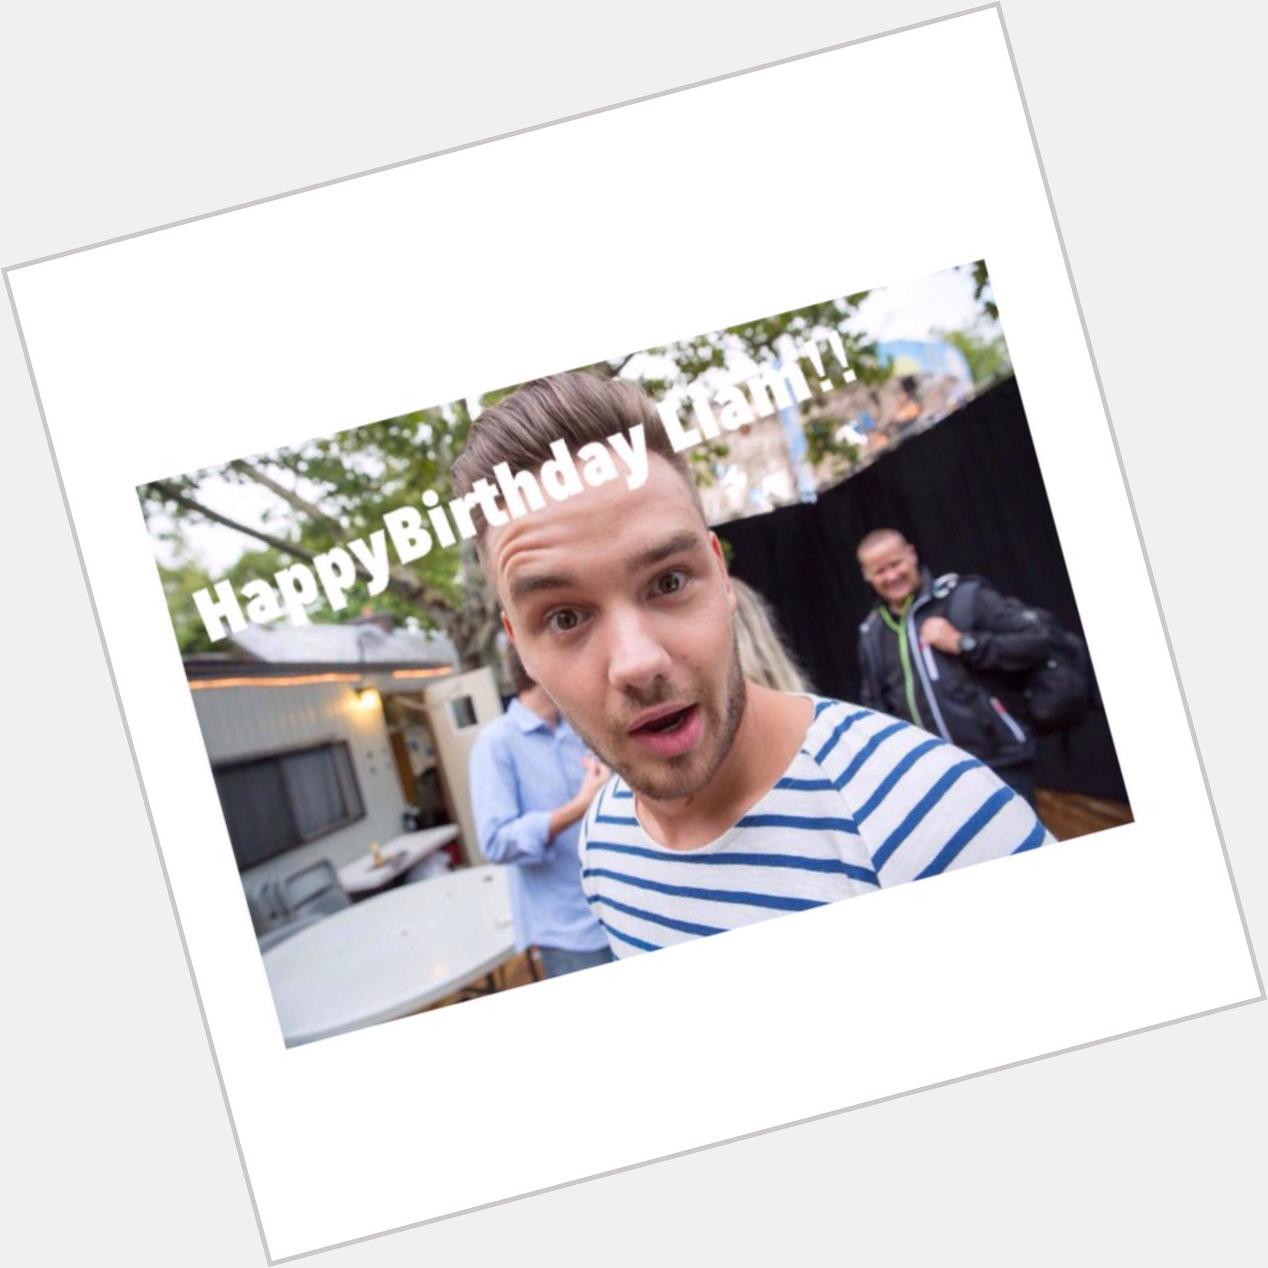  Happy Birthday Liam   Have a great year : )  